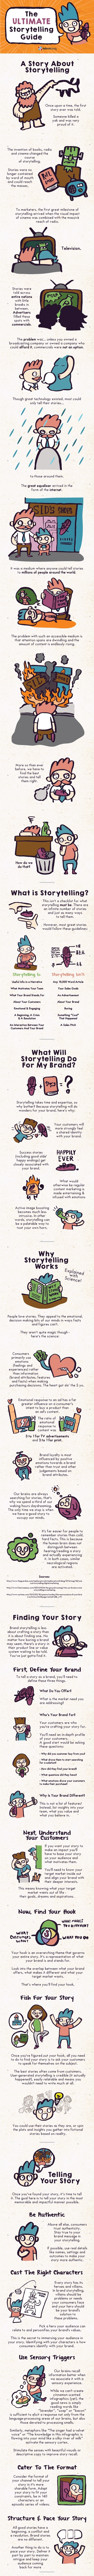 The Ultimate Storytelling Guide Infographic